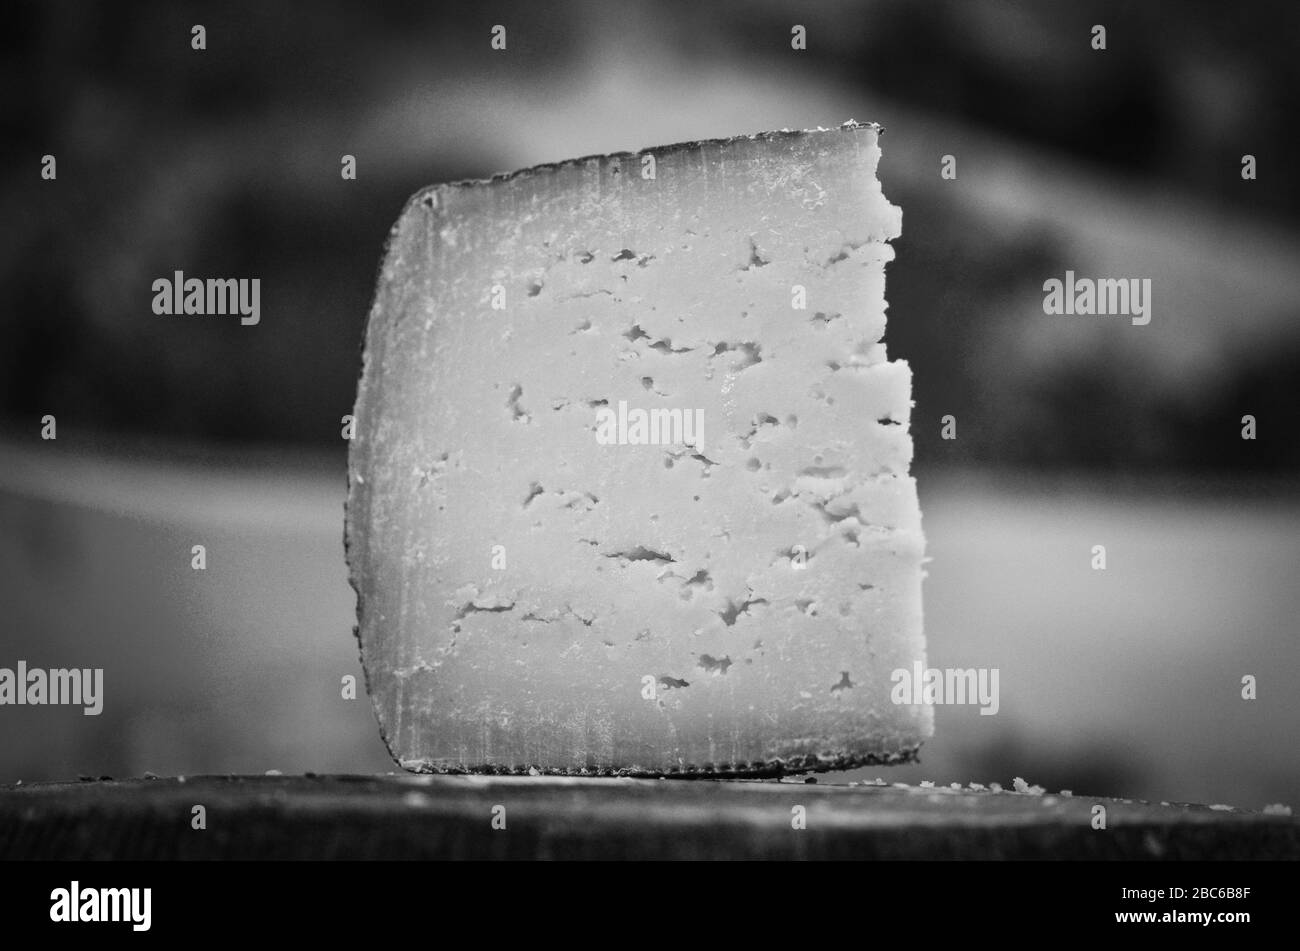 mix of artisanal cheese close up view Stock Photo